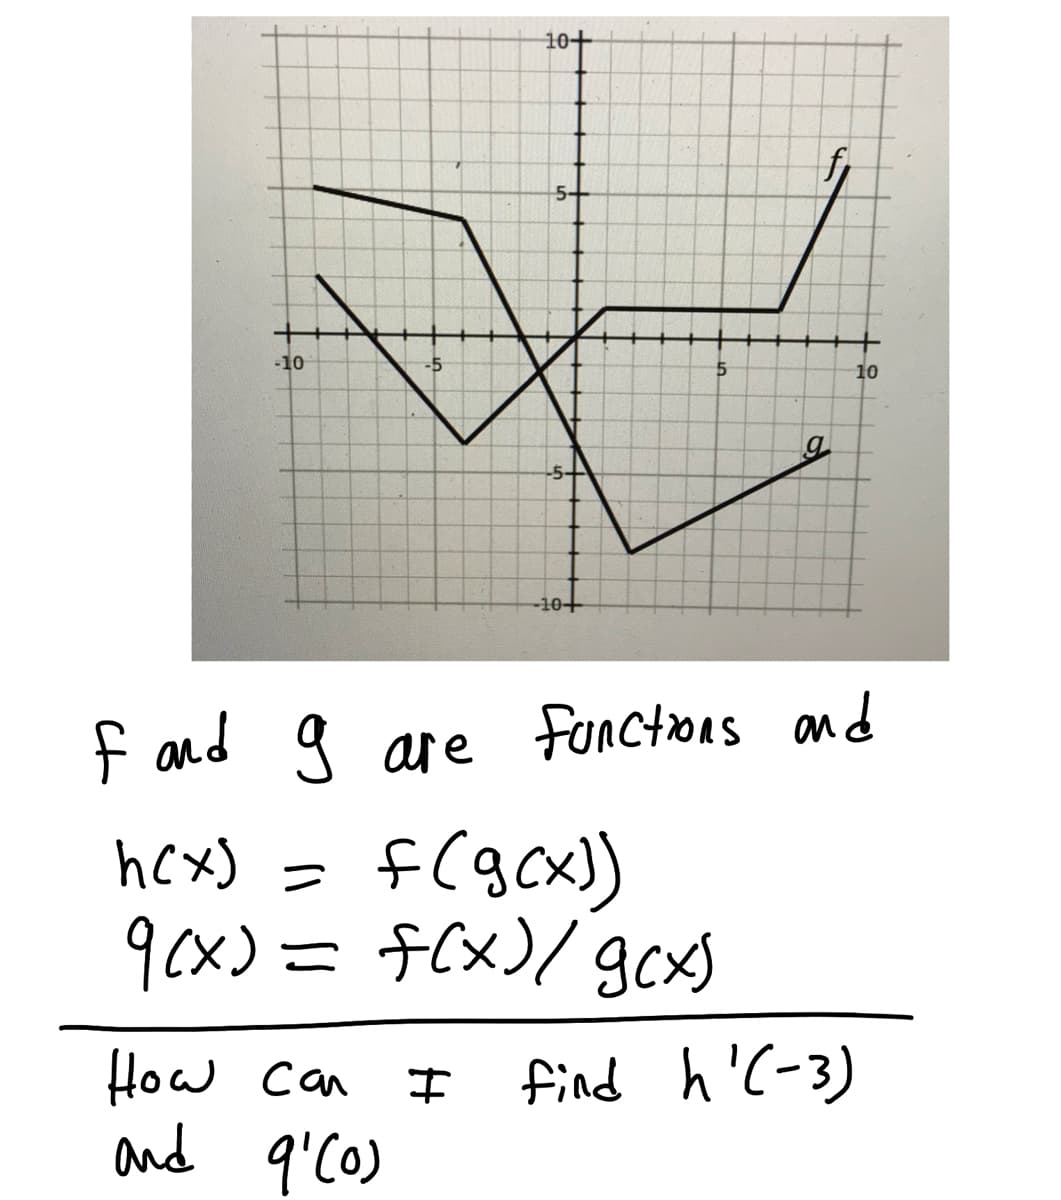 ot
-10
-5
10
-5-
f and 9 are functions and
f(gcx)
9cx)= f(x)/ gcx)
hcx) =
find h'(-3)
How can
and q'co)
